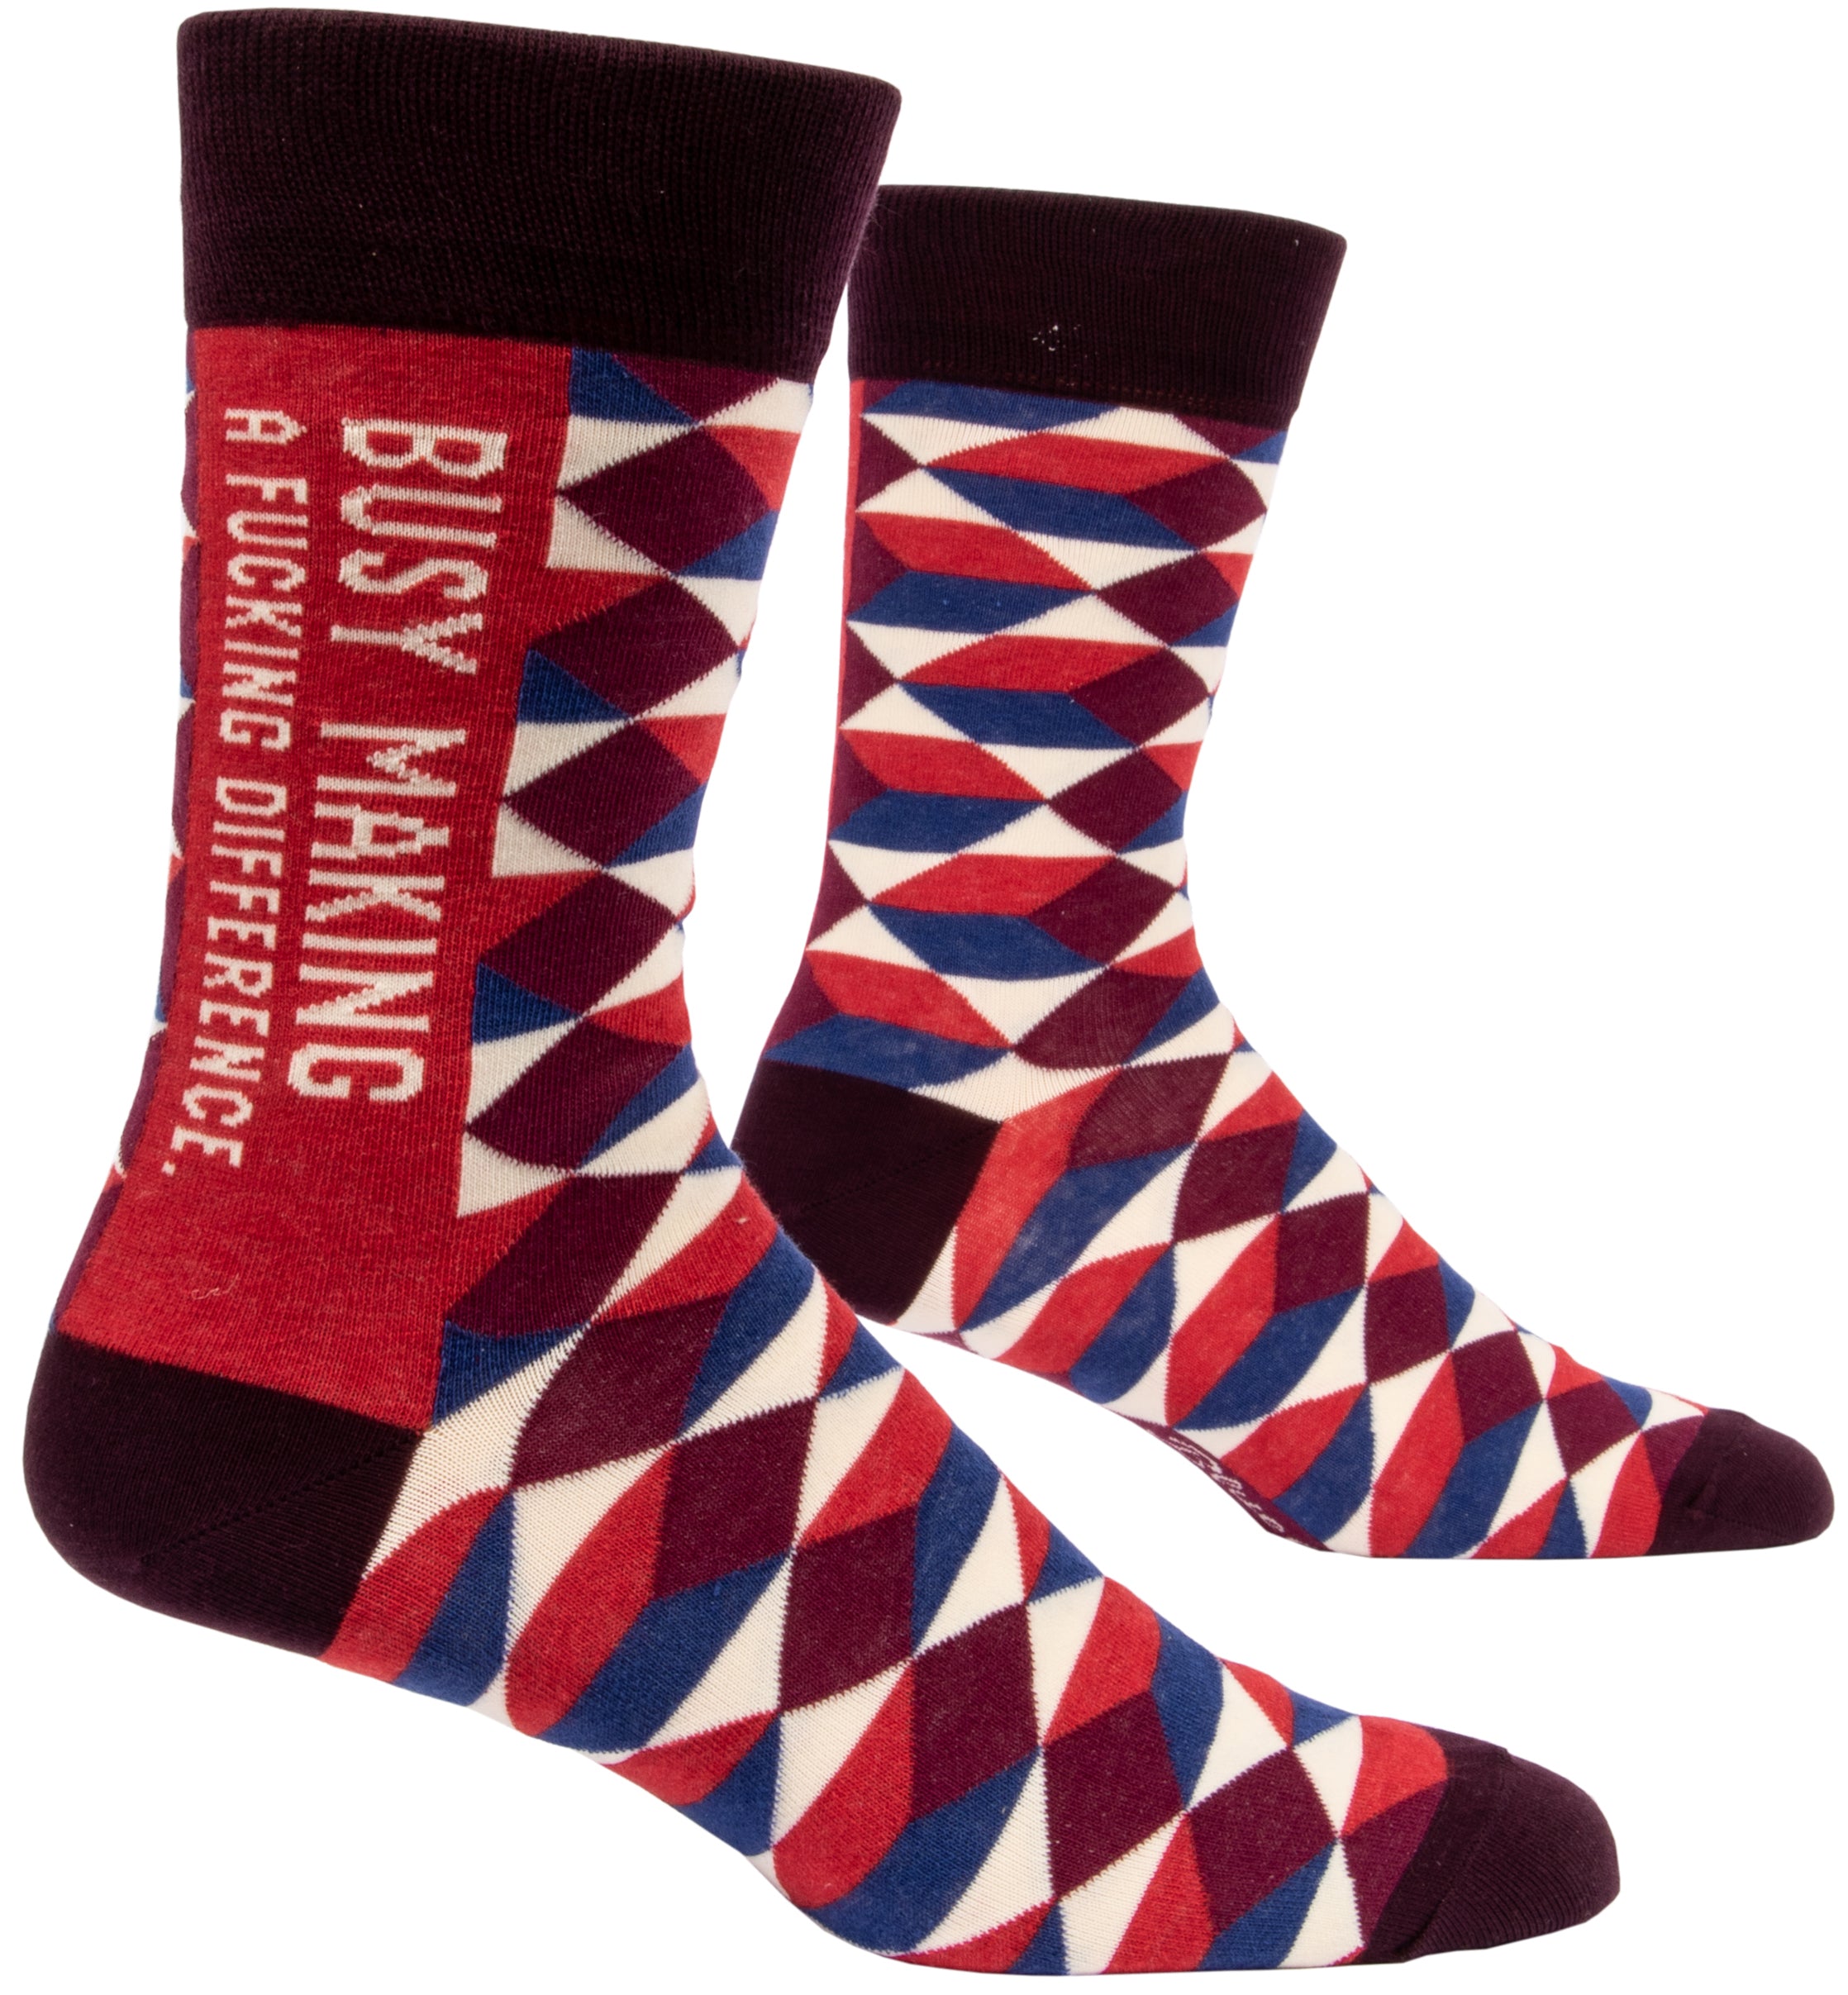 socks with retro style red, blue, white and brown diamond pattern on ankle says busy making a fucking differance